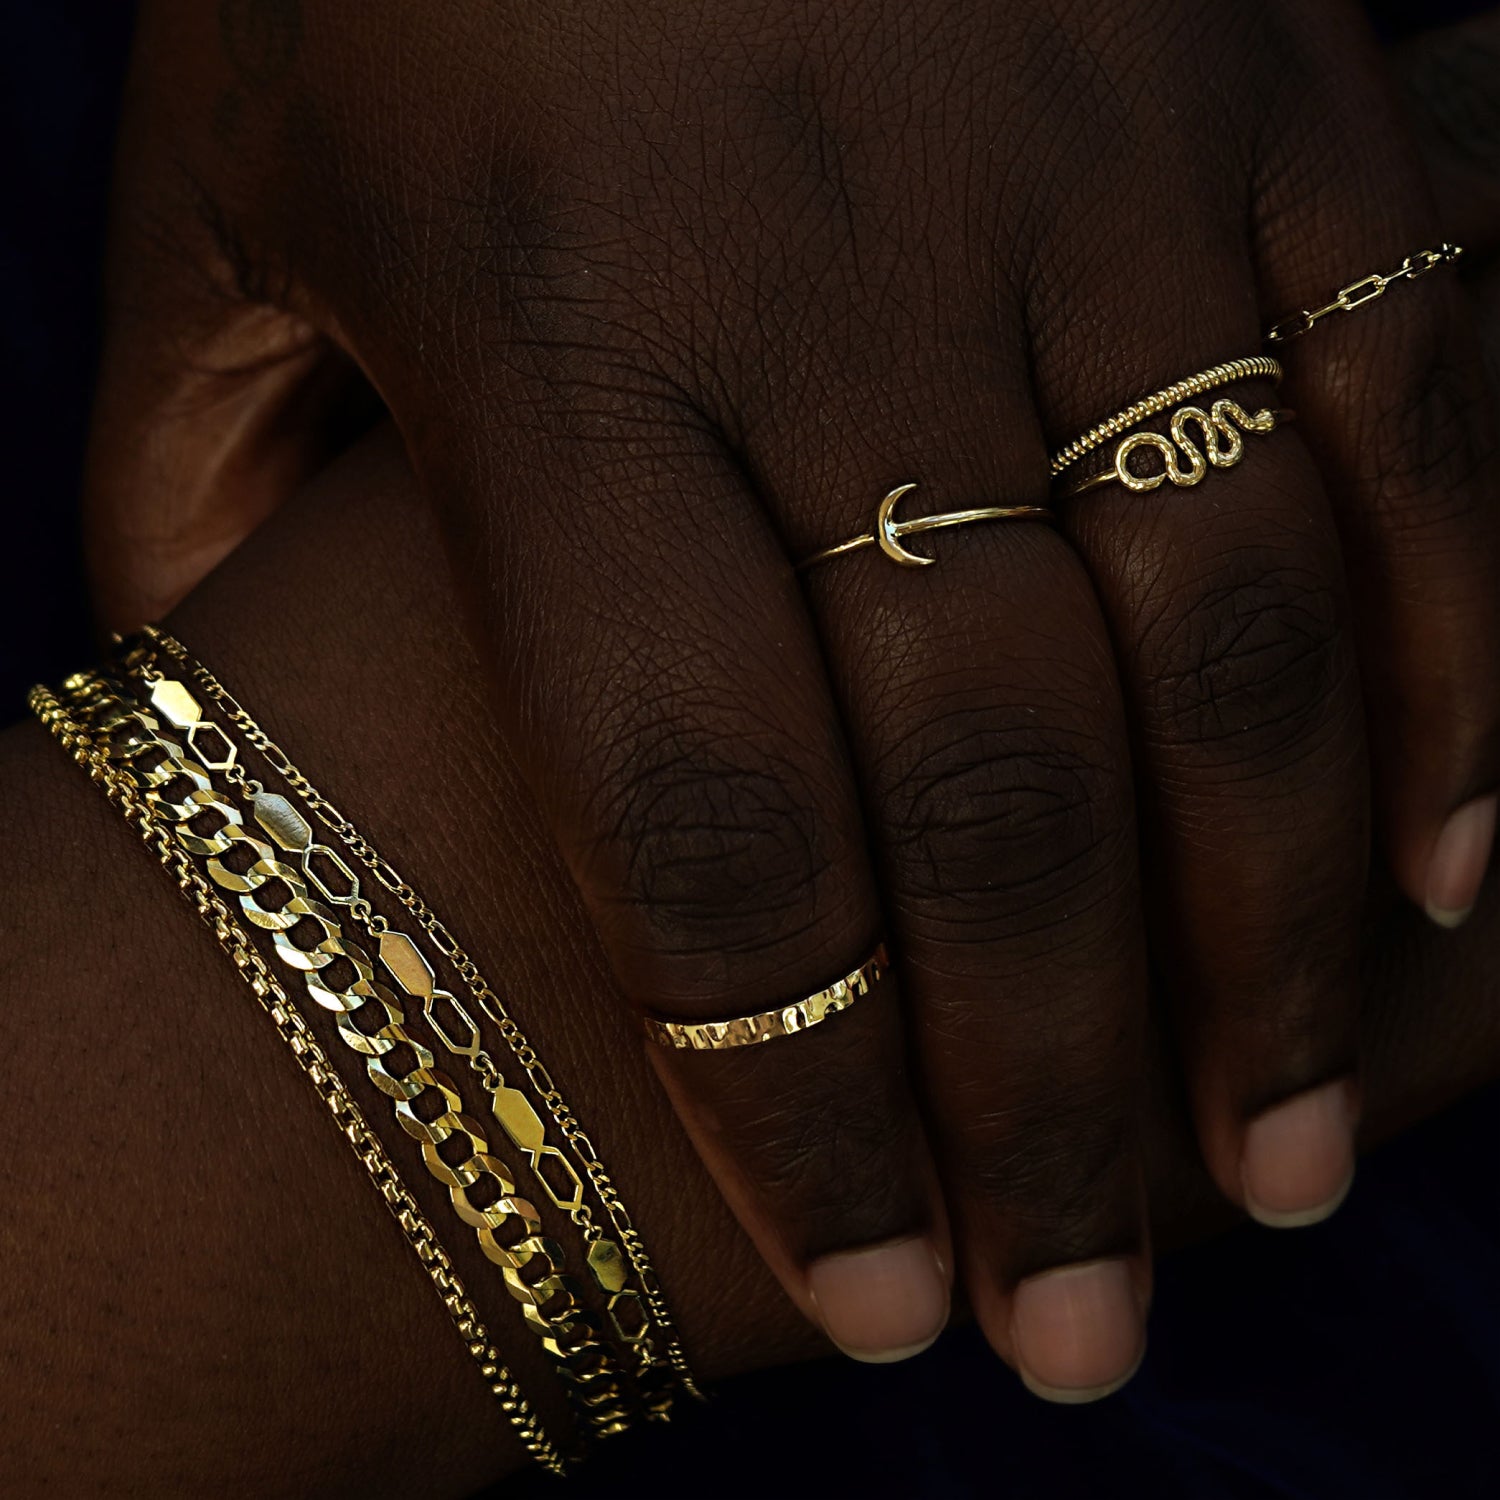 A model posing with one hand covering the other wearing several Automic Gold rings and bracelets